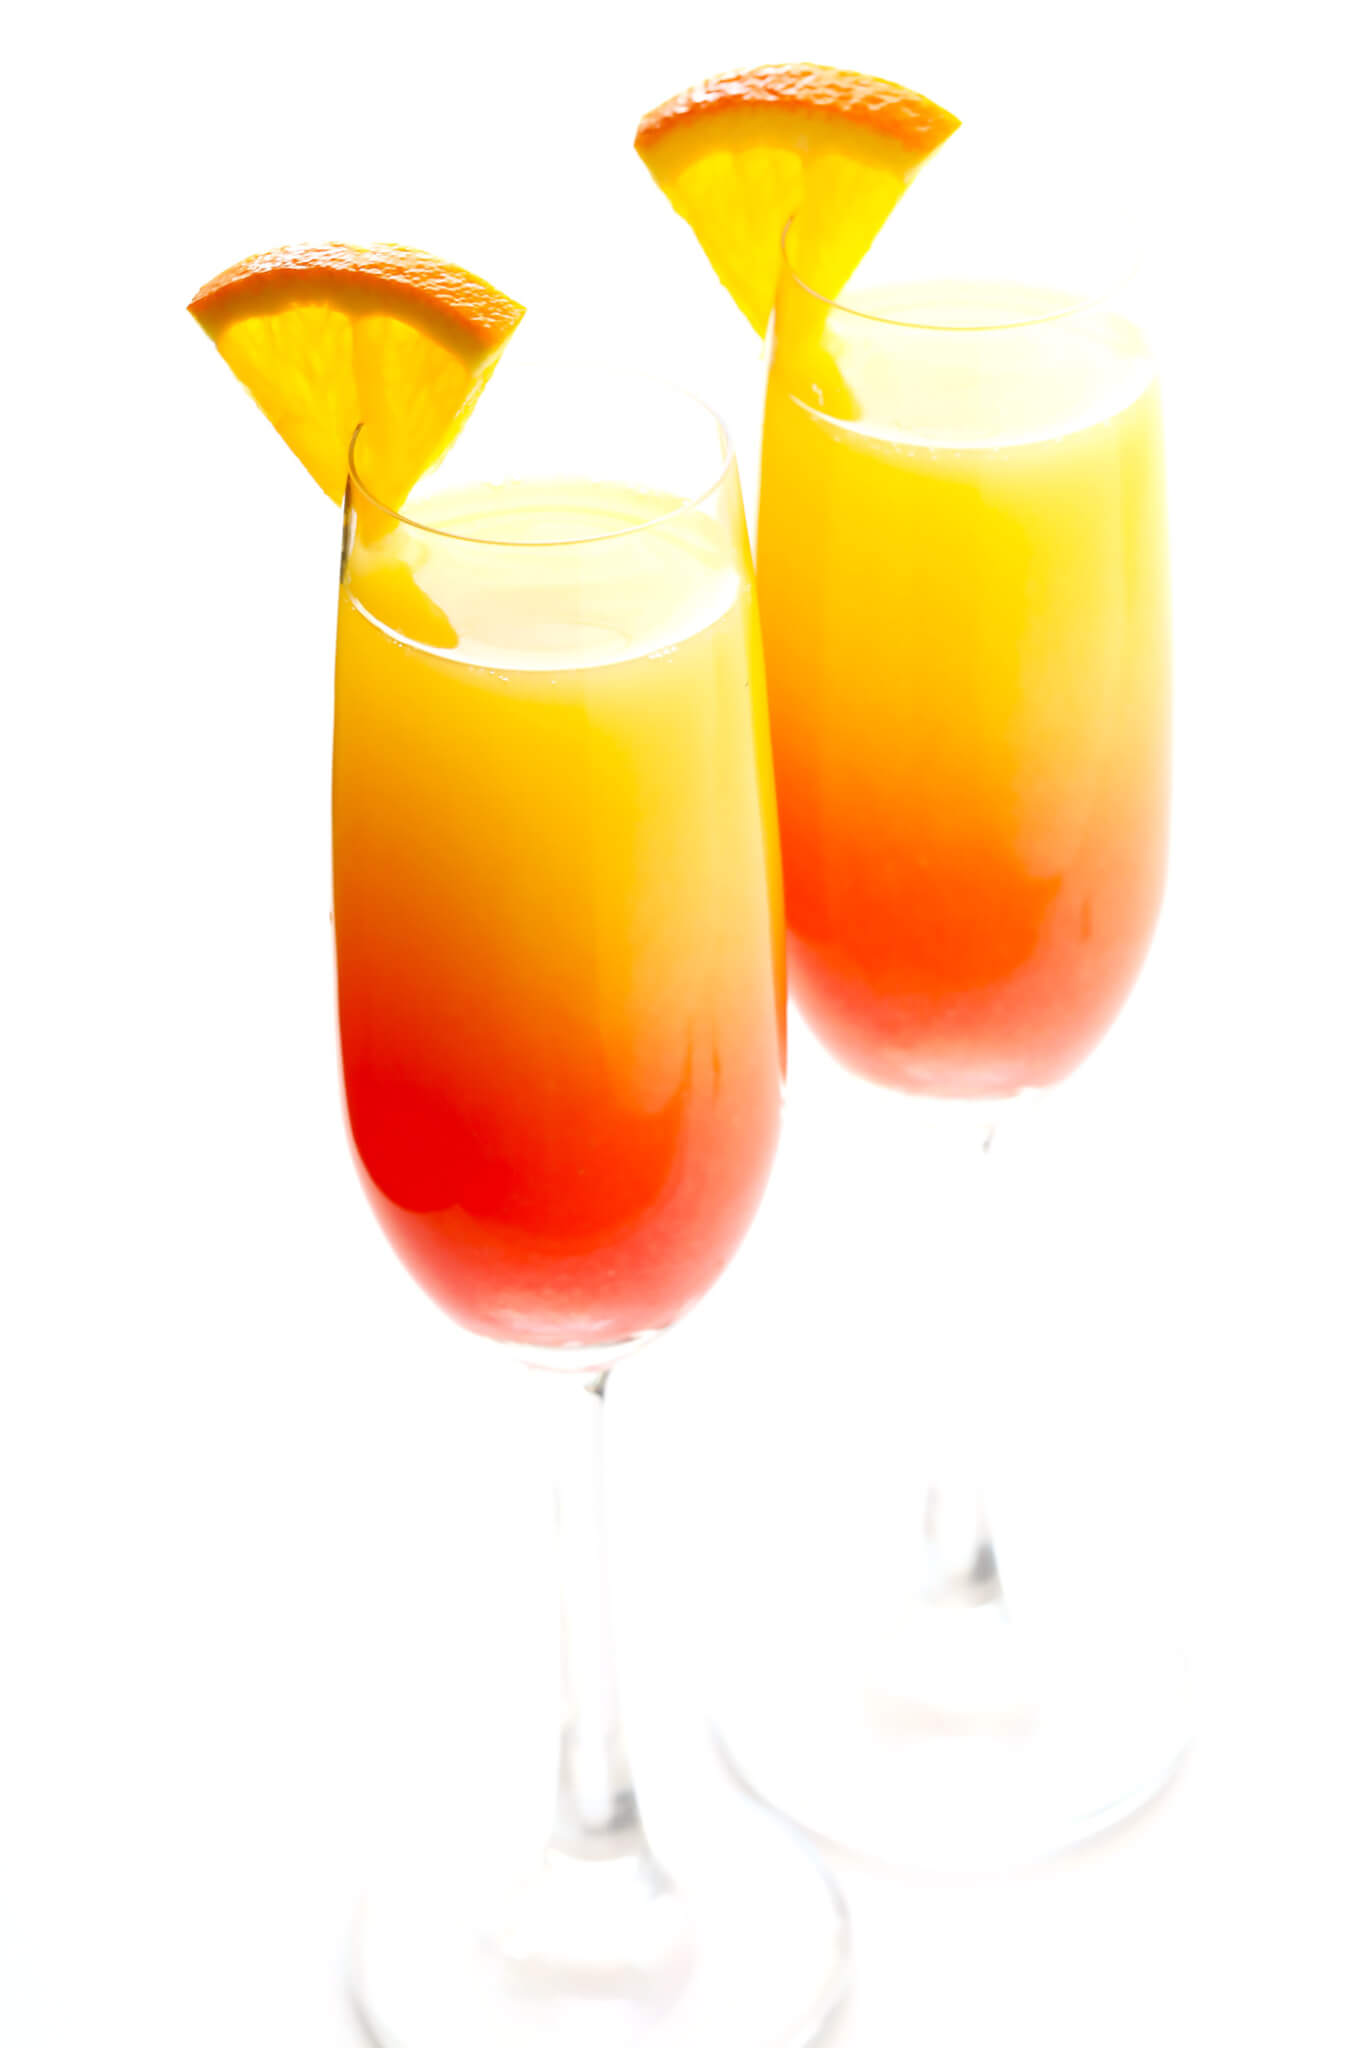 Tequila Sunrise Mimosa Gimme Some Oven,Vols Animal